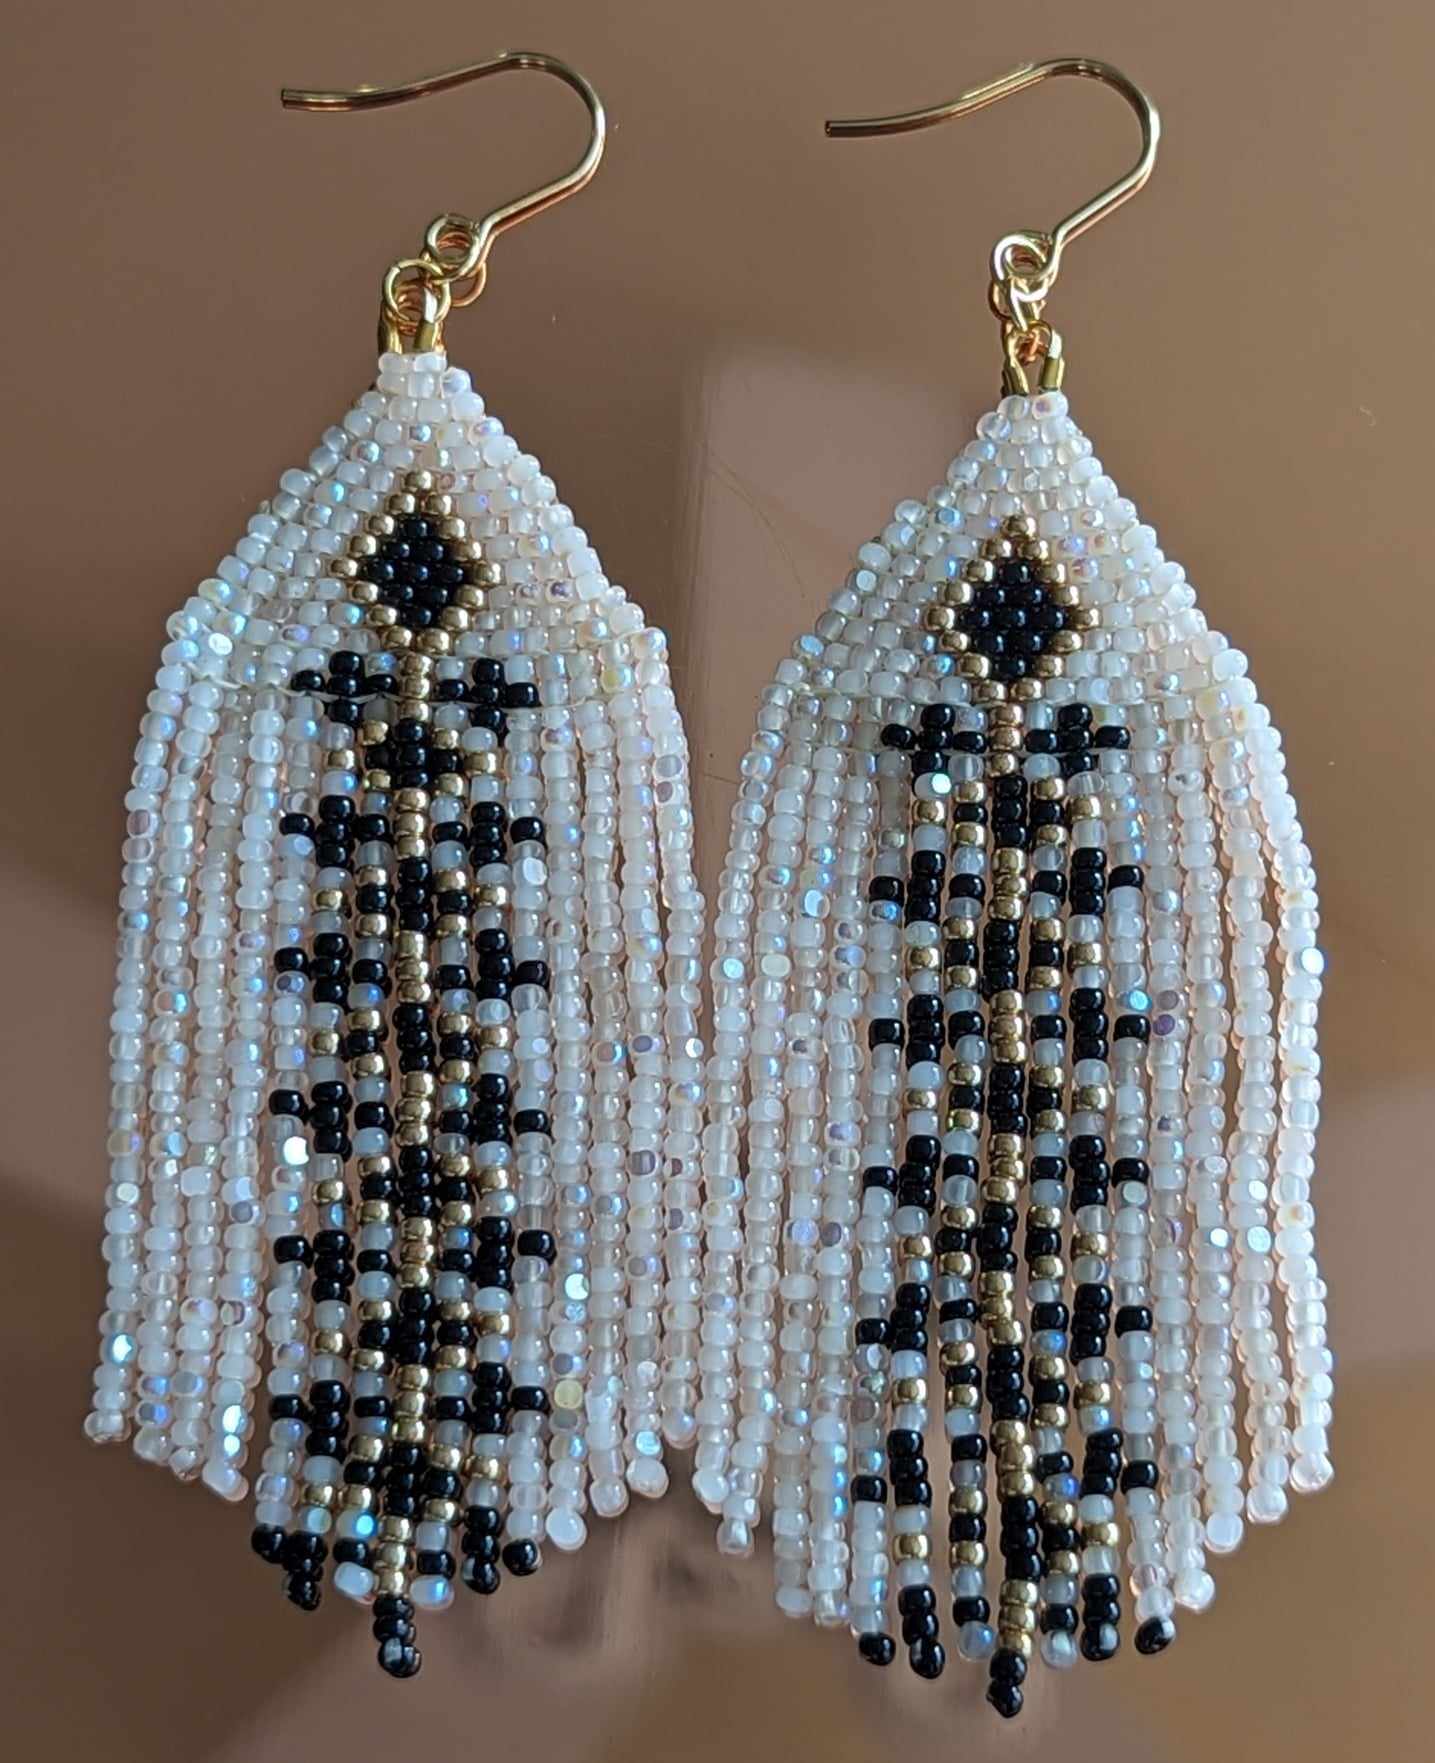 White and Gold special occasions earrings